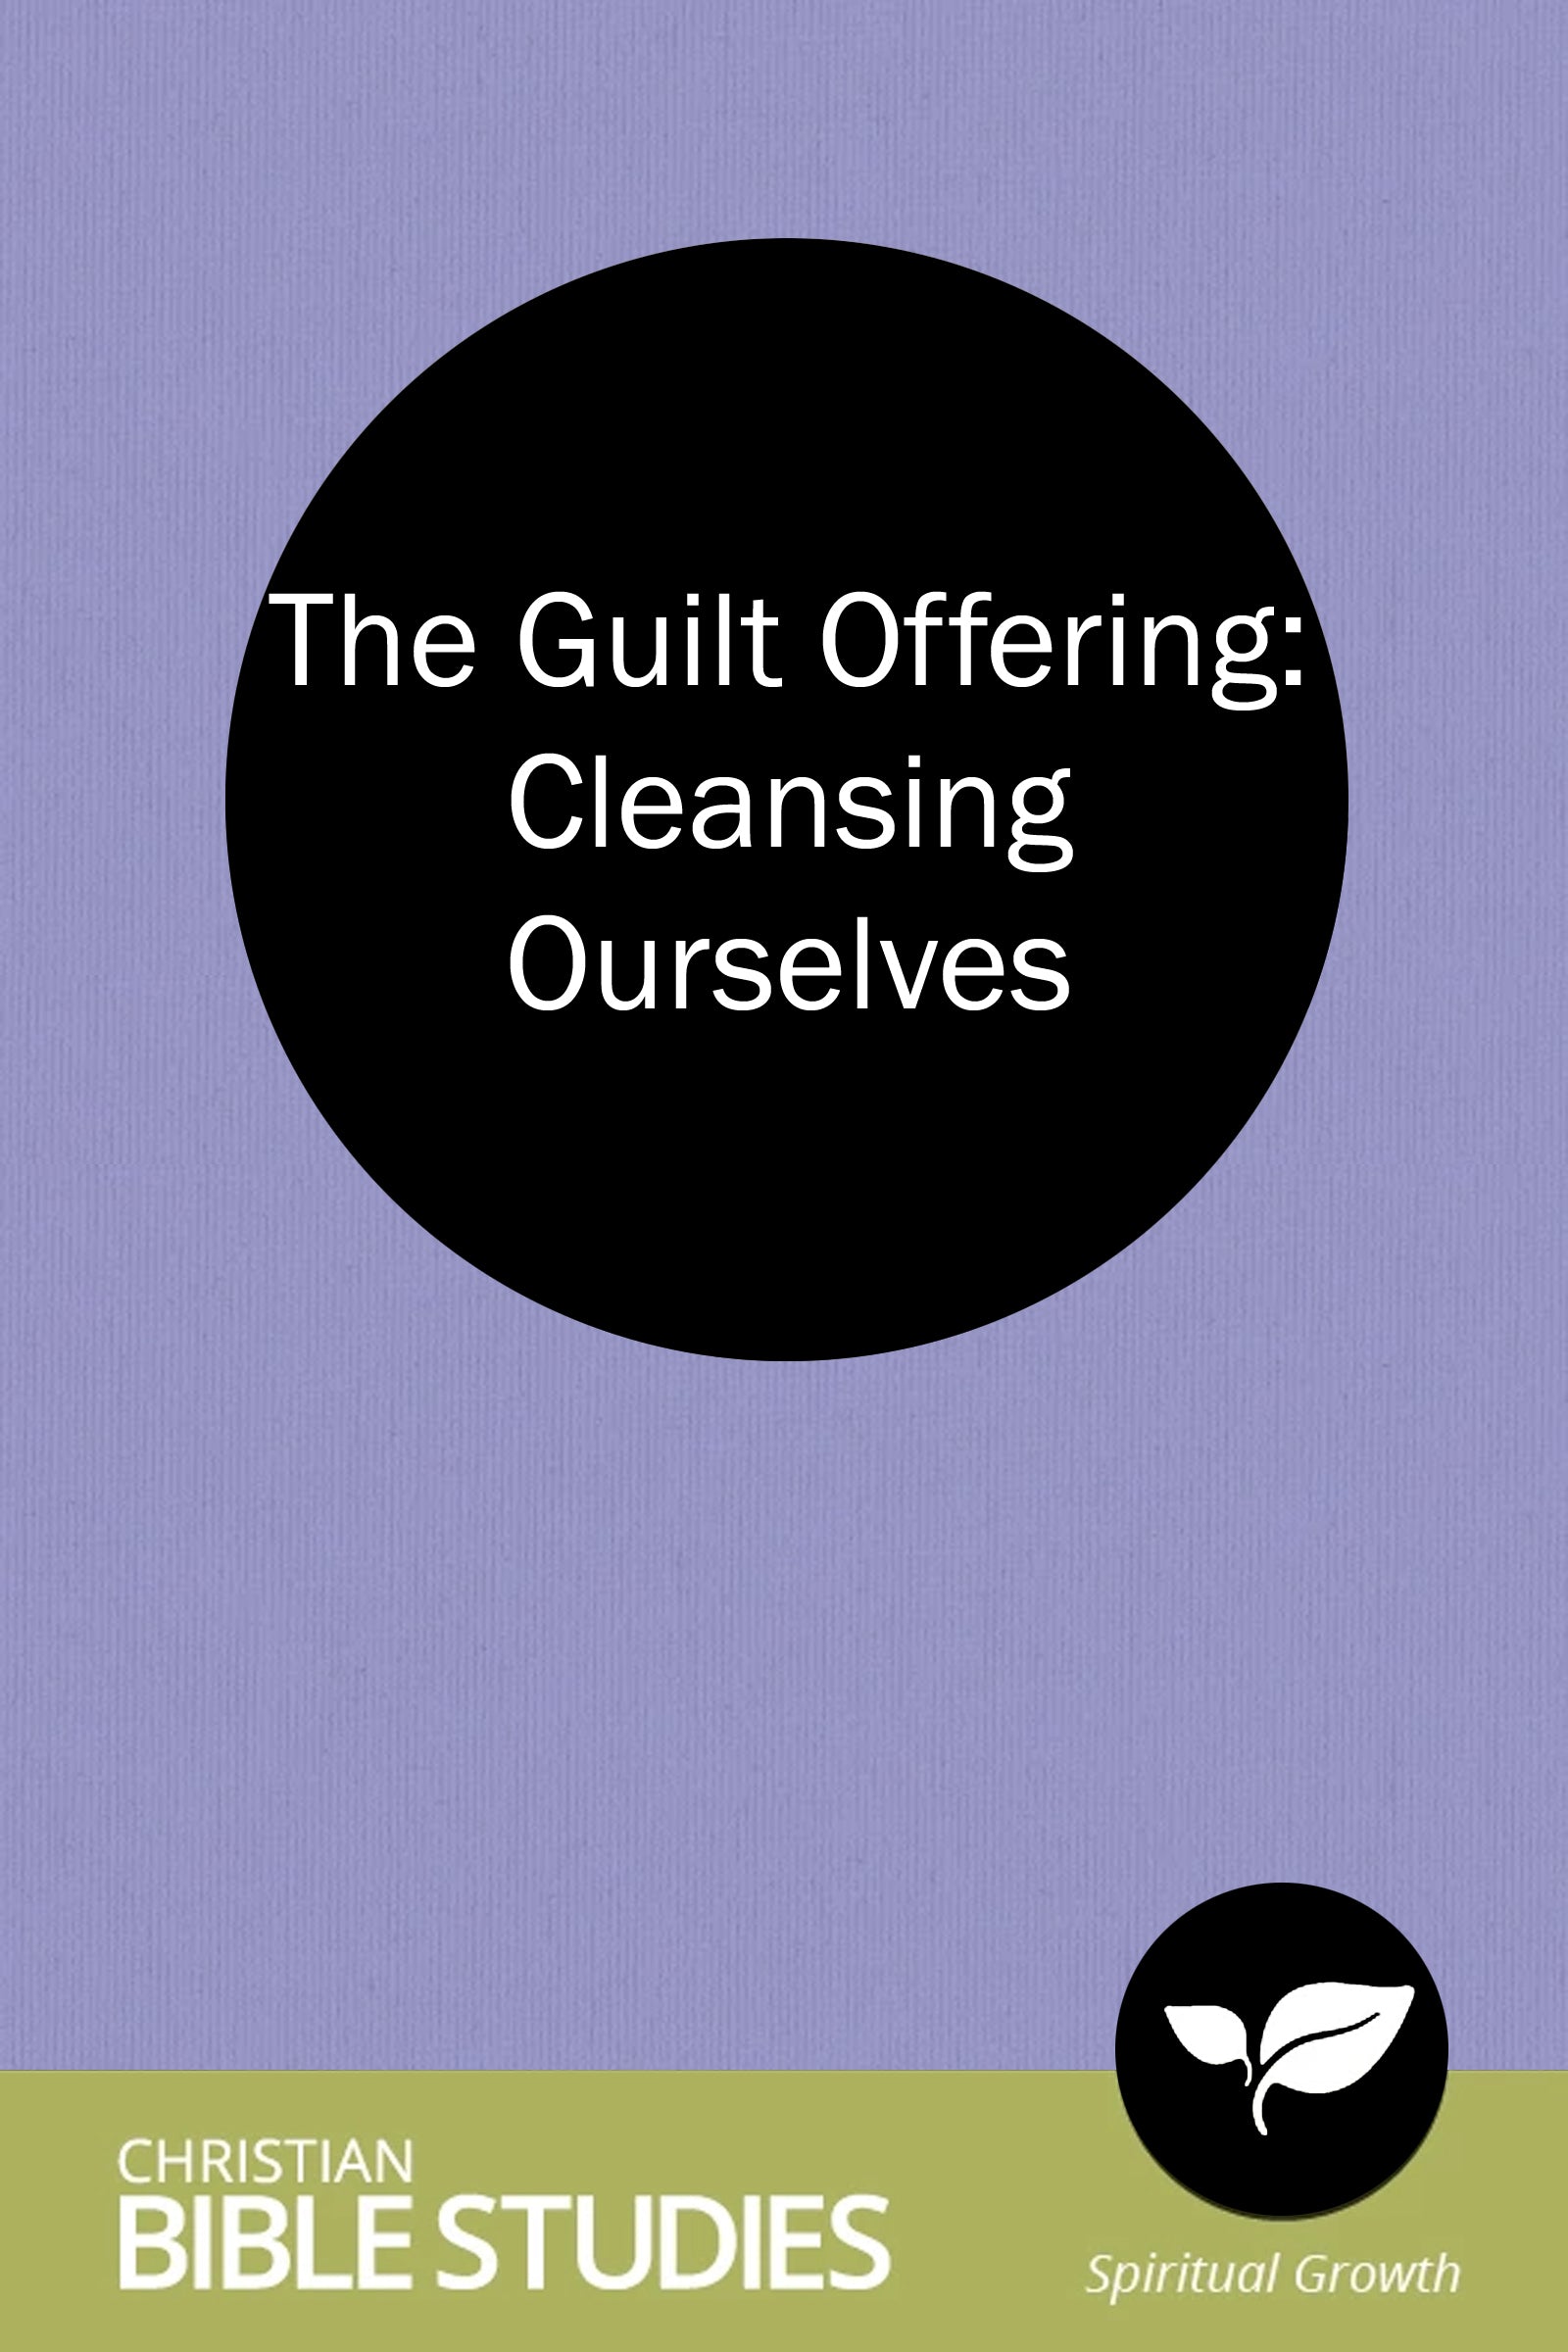 The Guilt Offering: Cleansing Ourselves